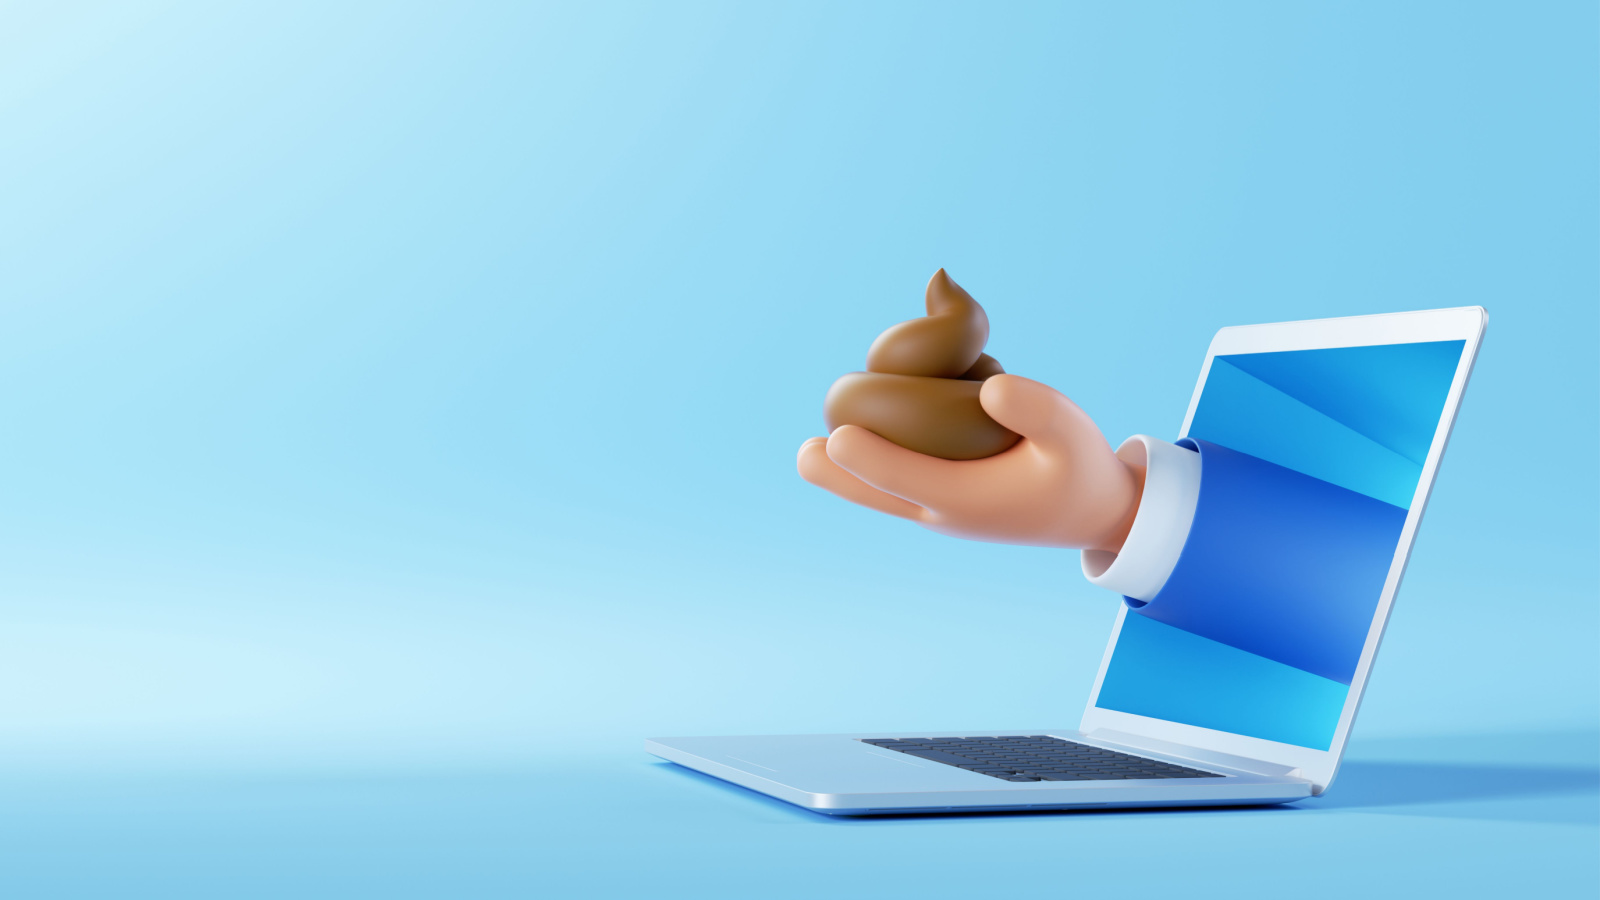 Illustration of hand and arm in blue suit reaching out of a laptop screen holding a cartoon piece of poo resembling an emoji